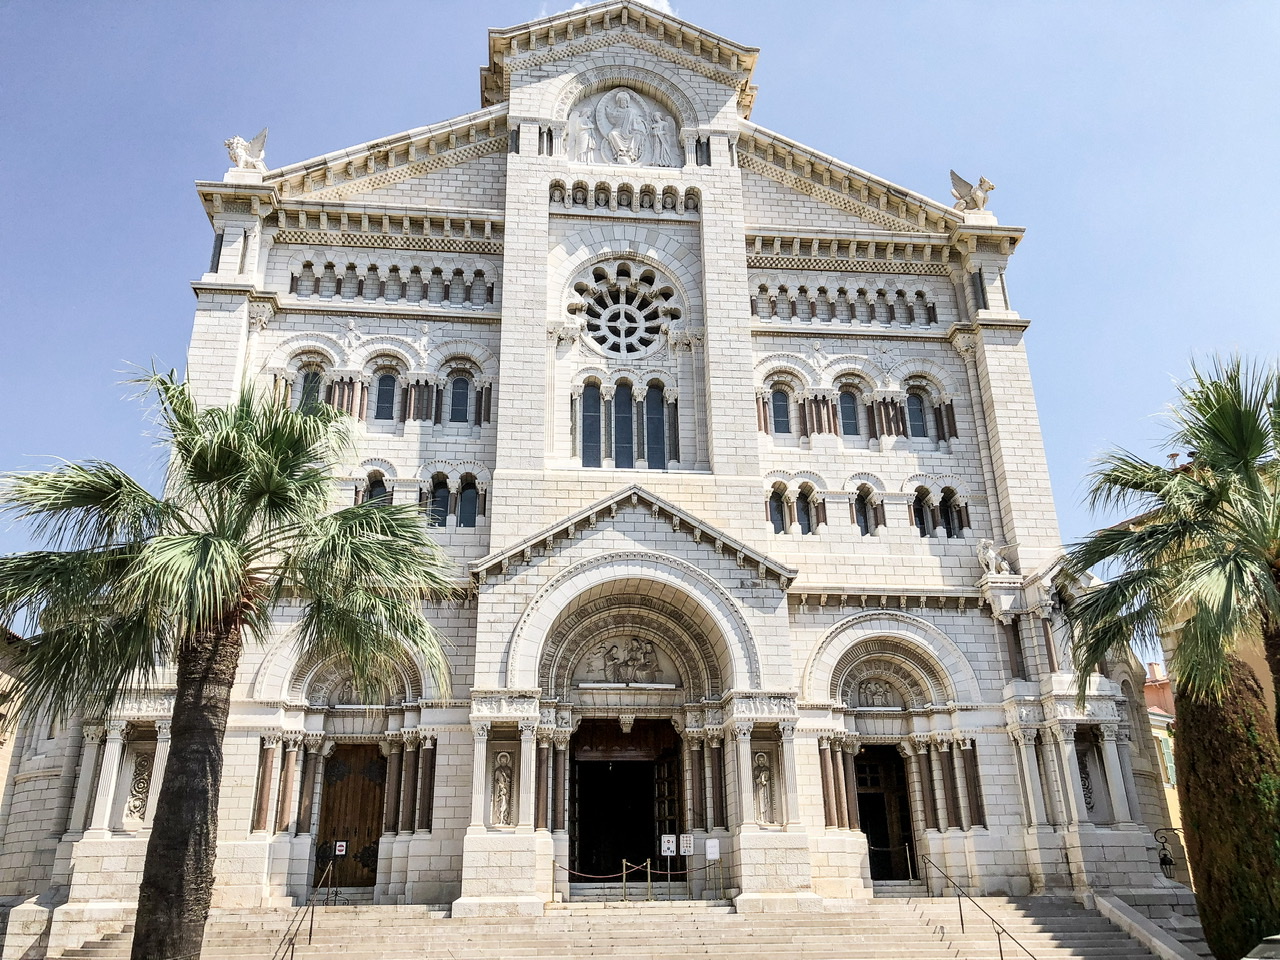 Exterior of Cathédrale de Monaco, a white gothic era cathedral with steps leading up to it and palm trees either side